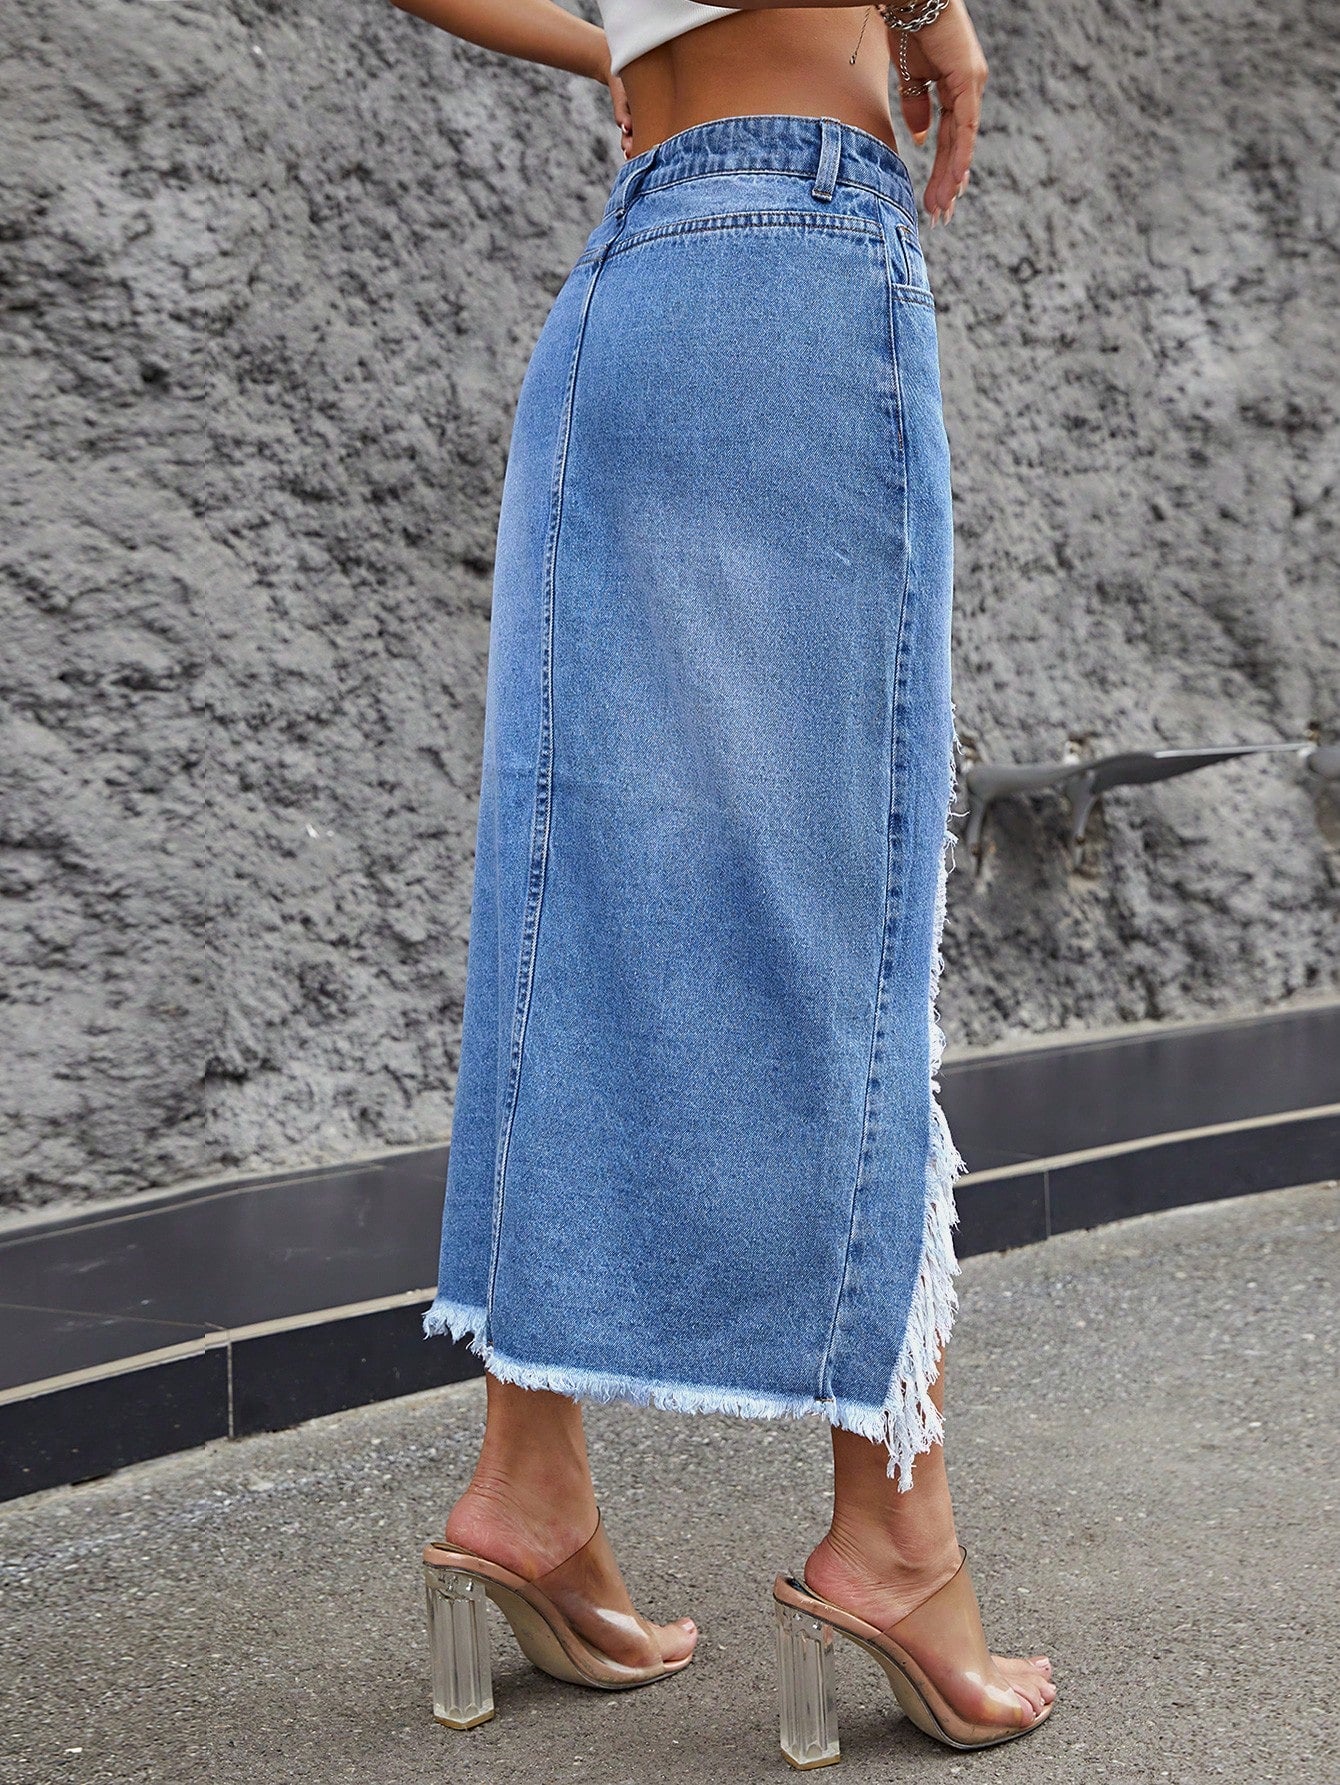 Chic and Trendy: Pocket-Patched Asymmetrical Denim Skirt with Raw Hem